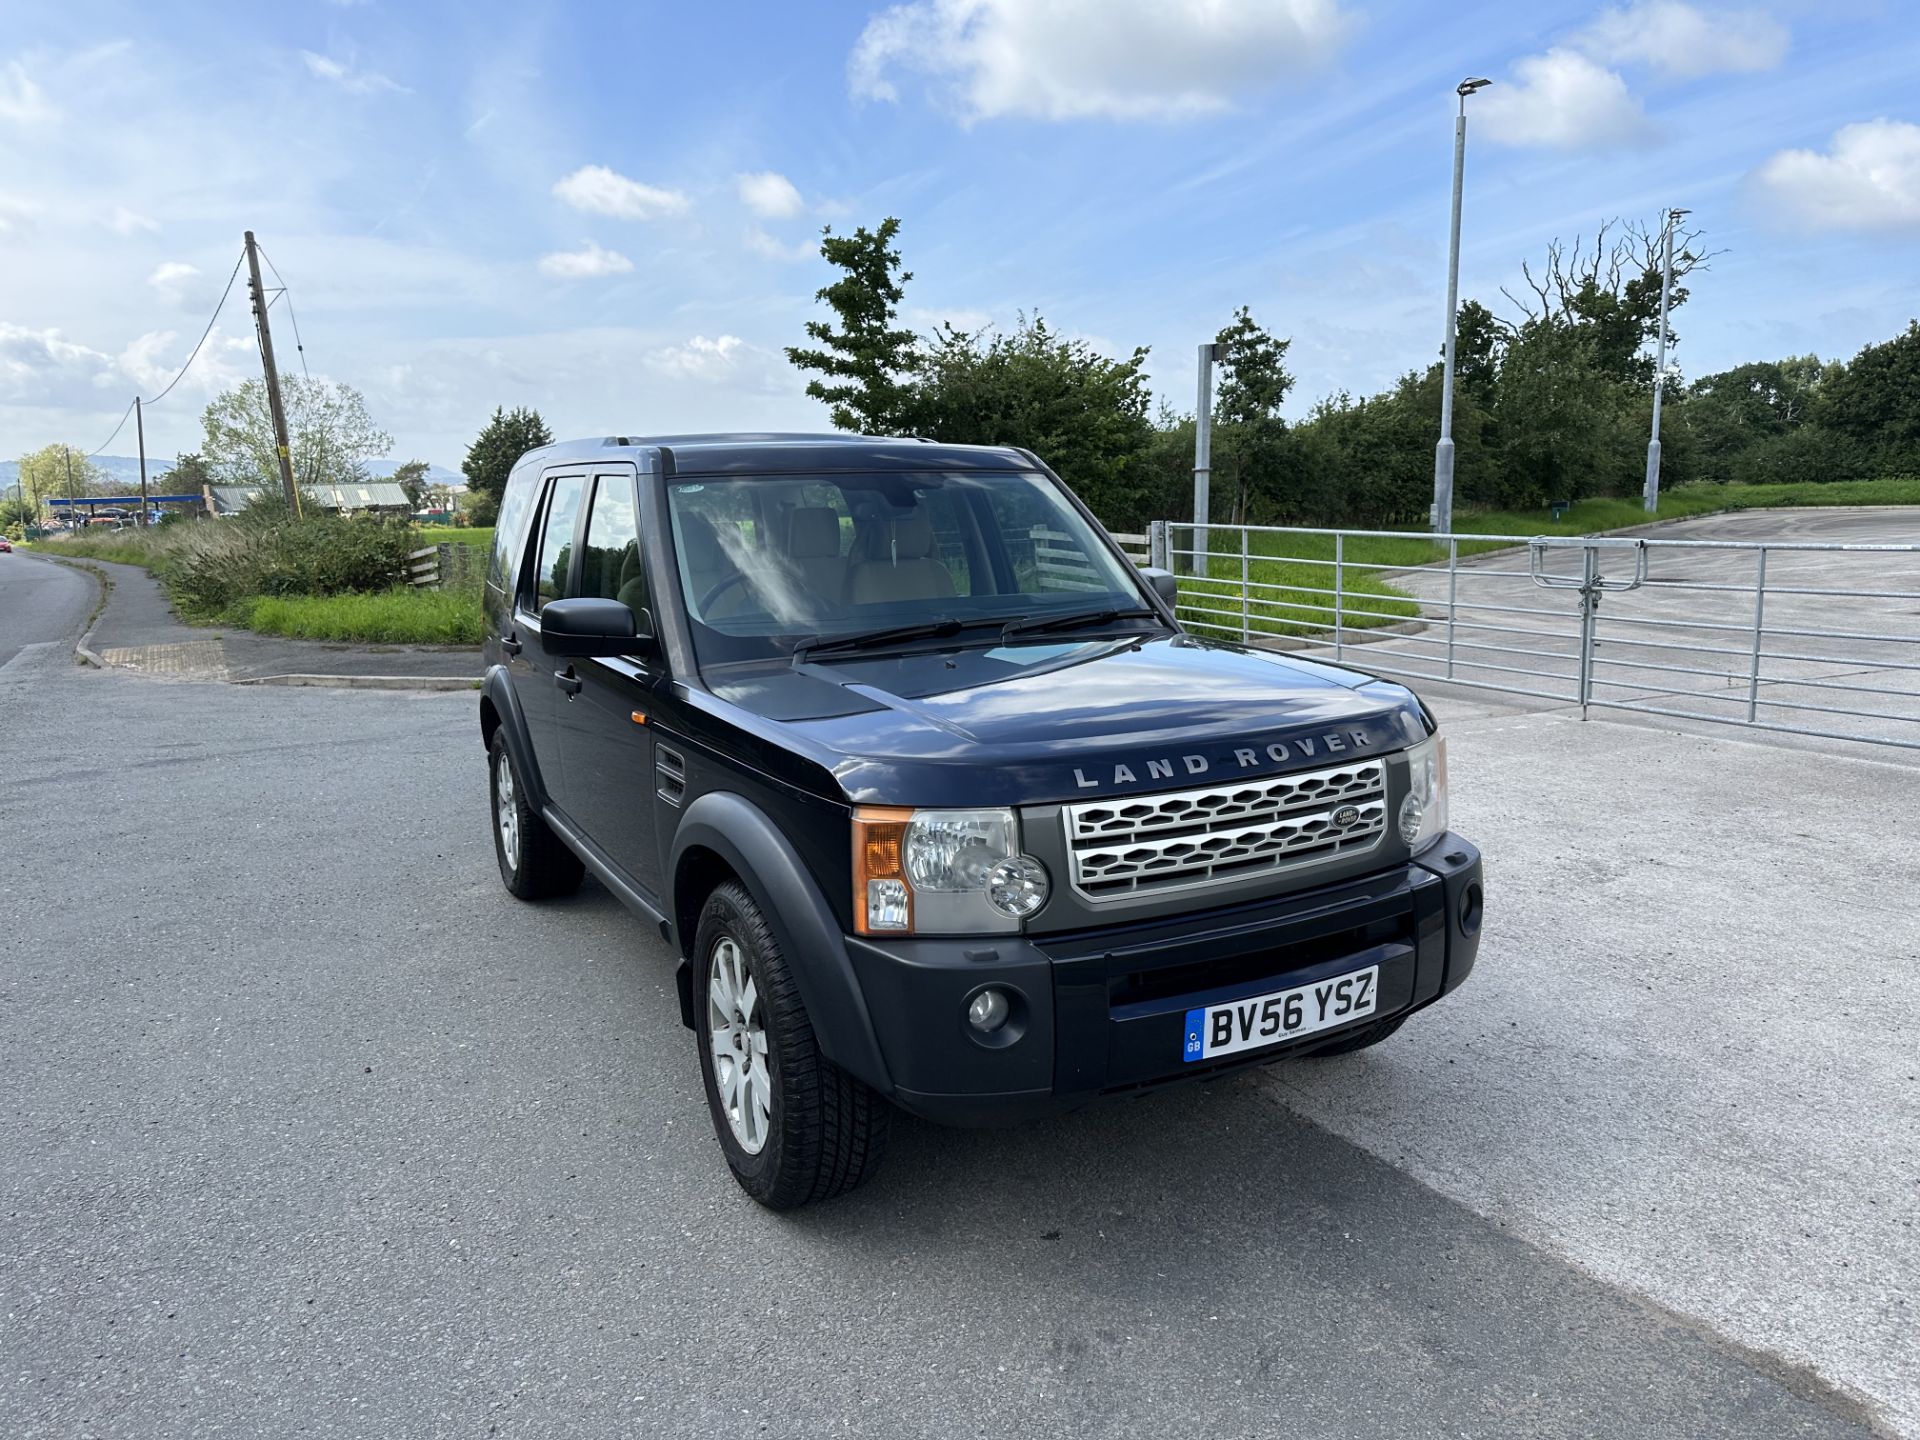 LAND ROVER DISCOVERY 3 - 2006- 2.7 LITRE - Image 3 of 13